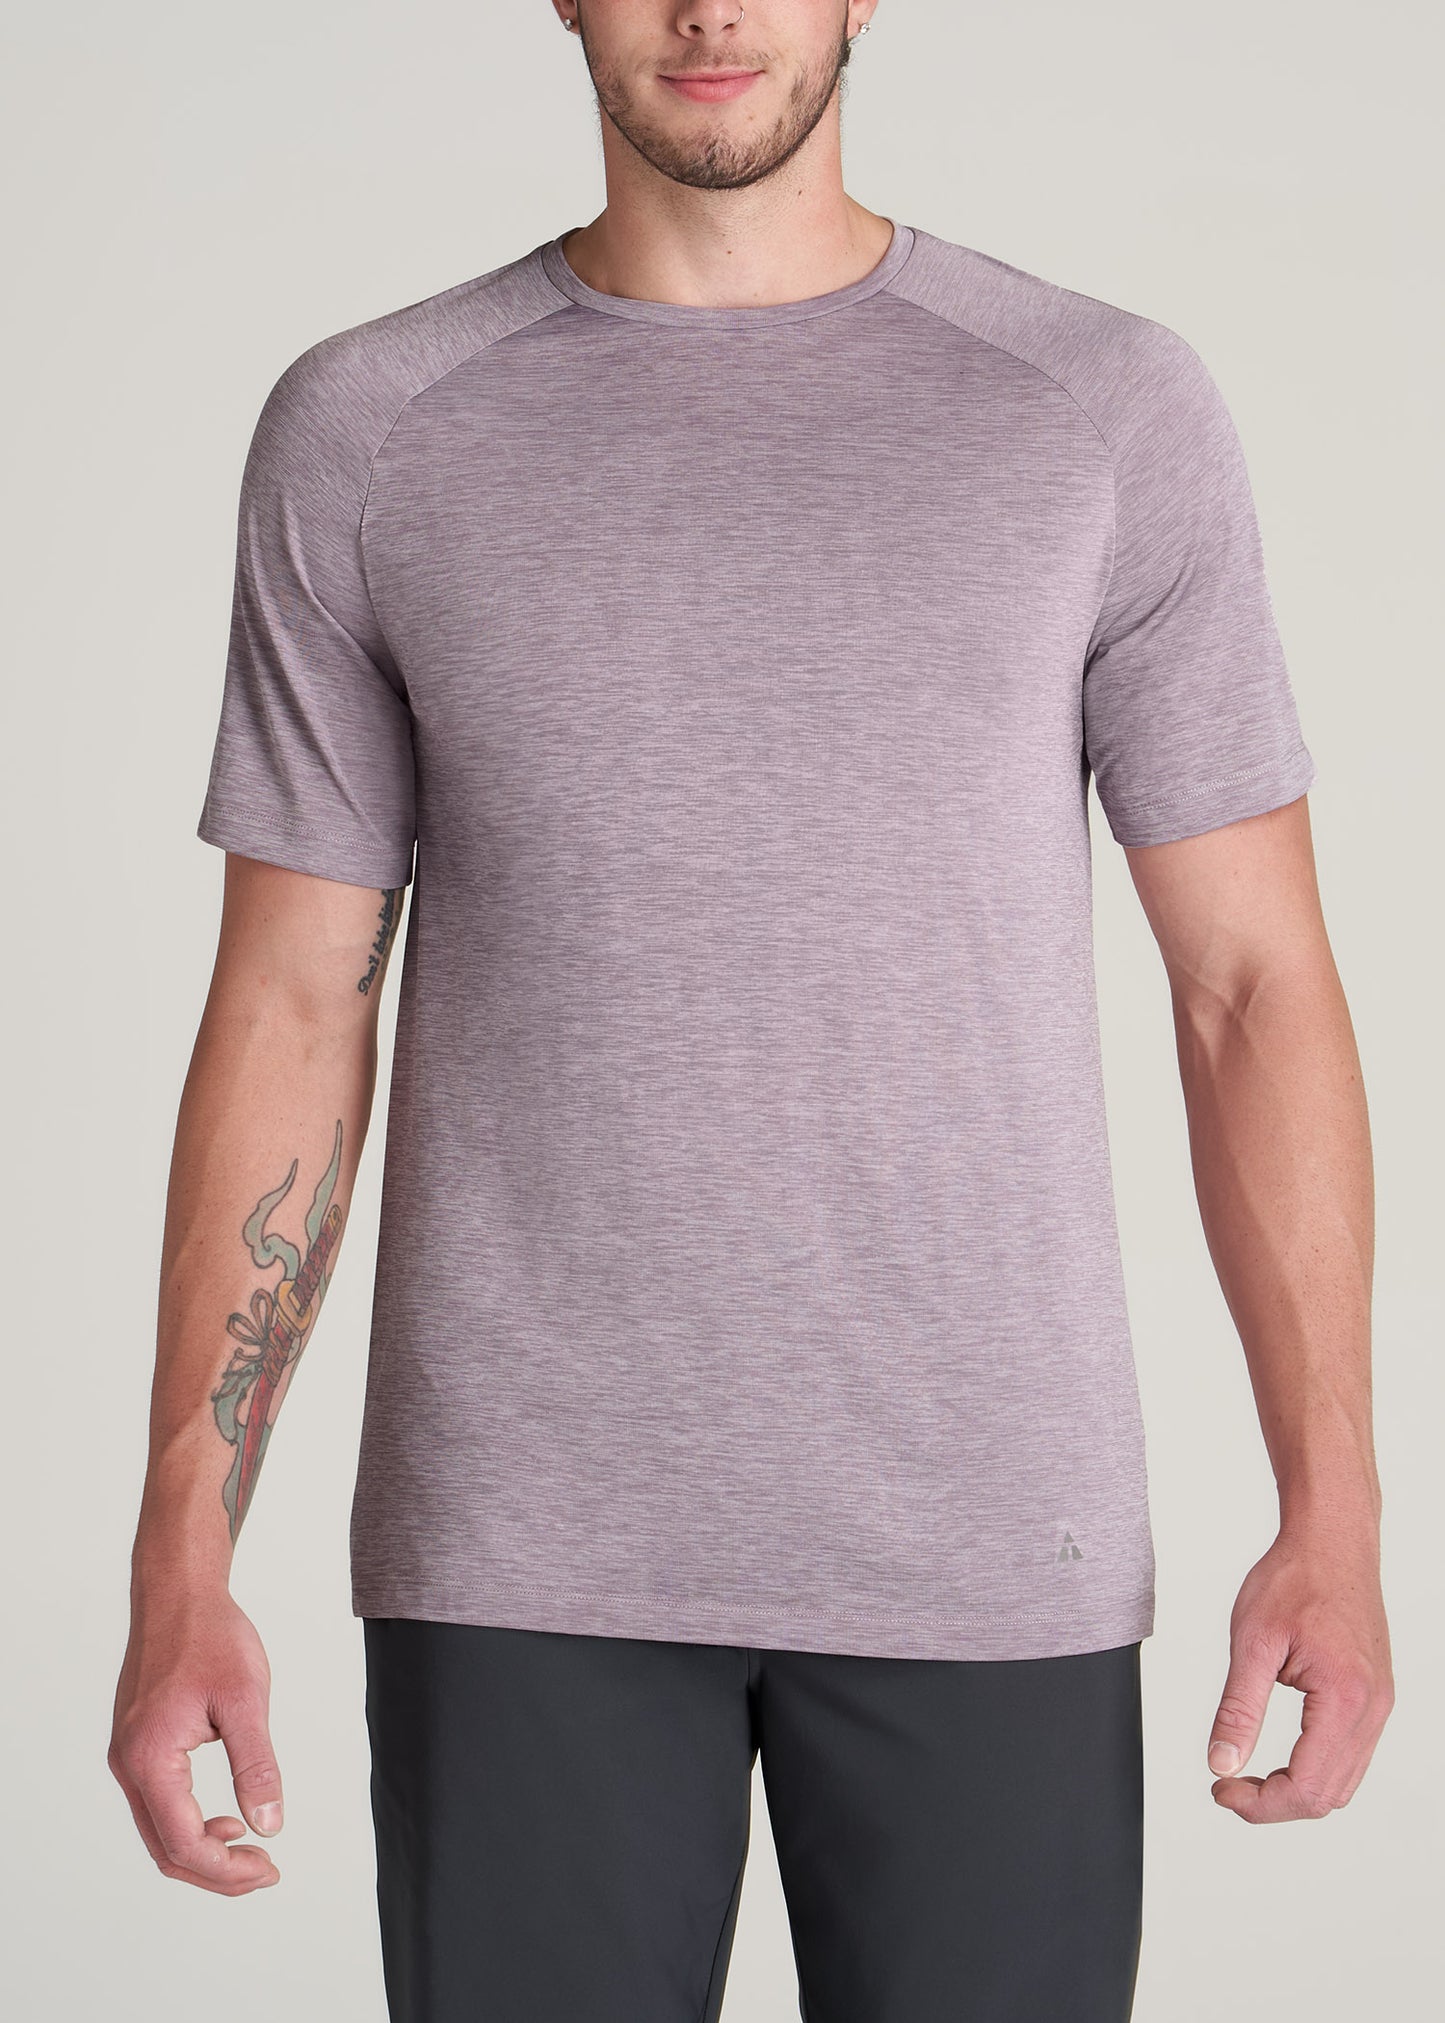 A tall man wearing American Tall's A.T. Performance MODERN-FIT Raglan Short sleeve Tee for Tall Men in Lavender Mix.